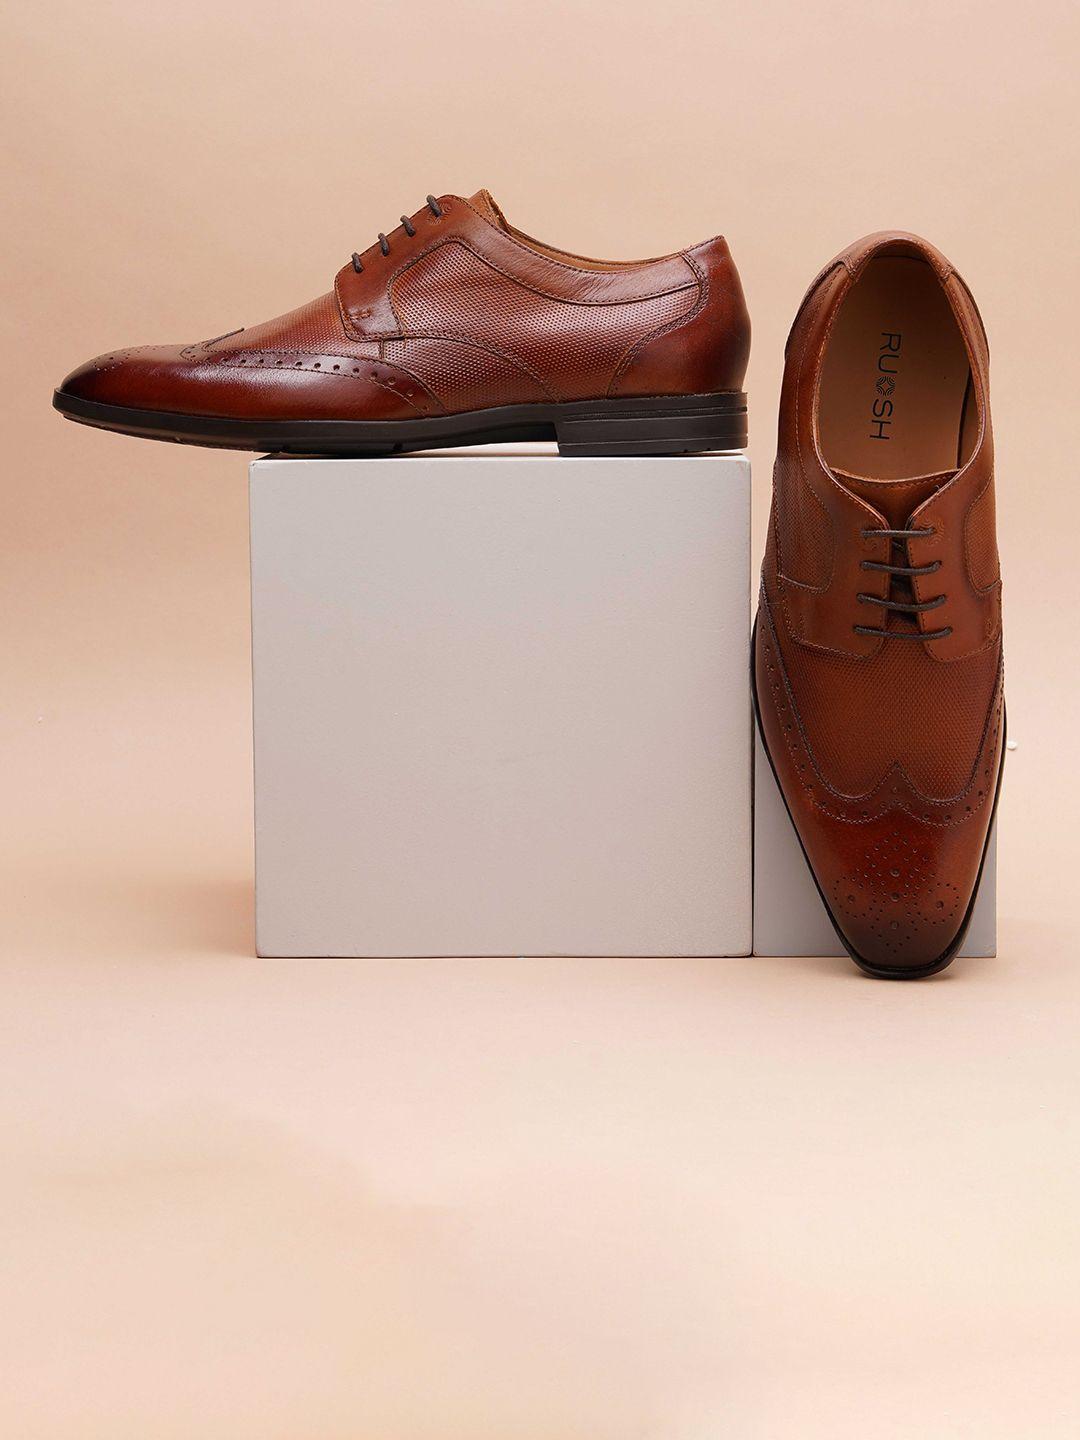 ruosh-men-leather-formal-brogues